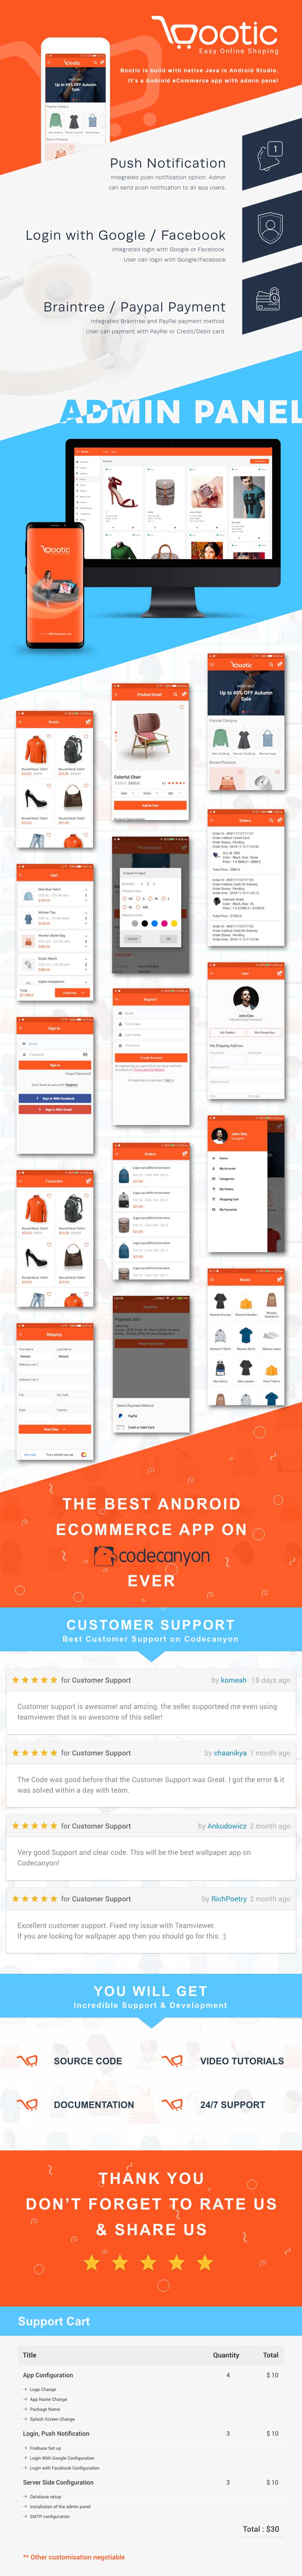 Bootic Full - An android eCommerce app with admin panel - 6